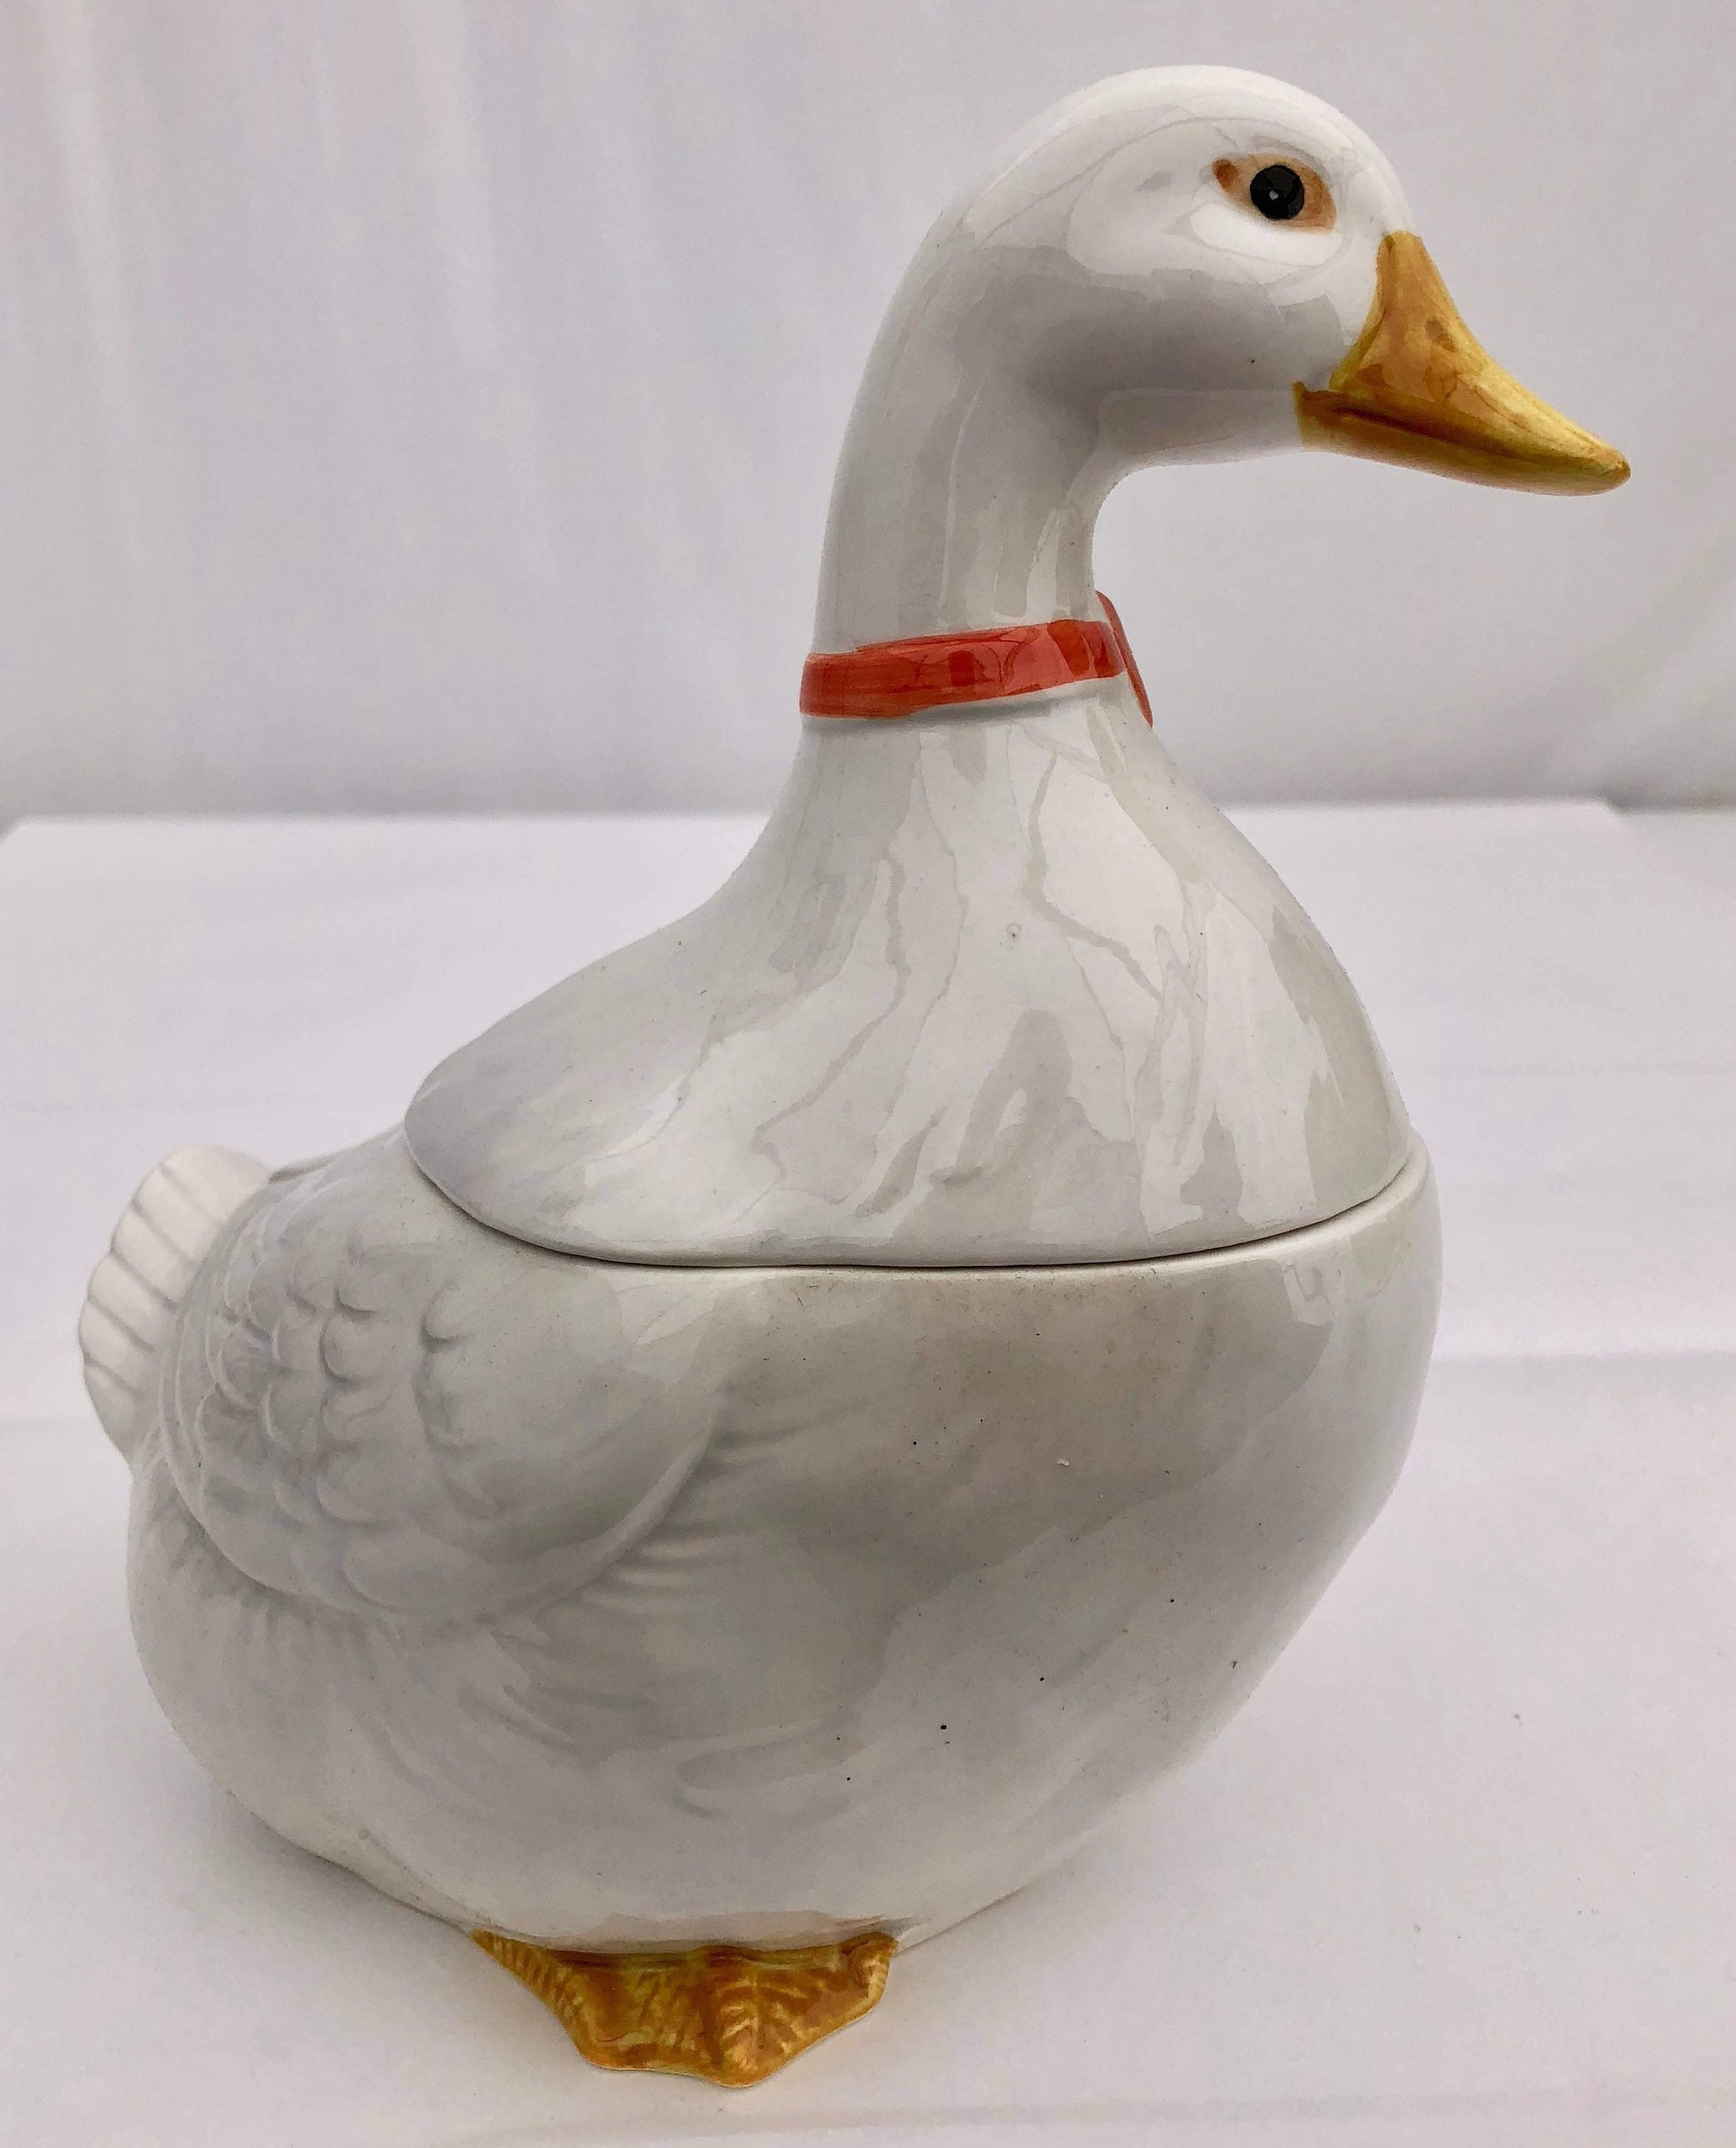 Japanese Goose Candy Jar Ceramic Handcrafted by Otagiri, Japan, 1983 in it's Original Box For Sale